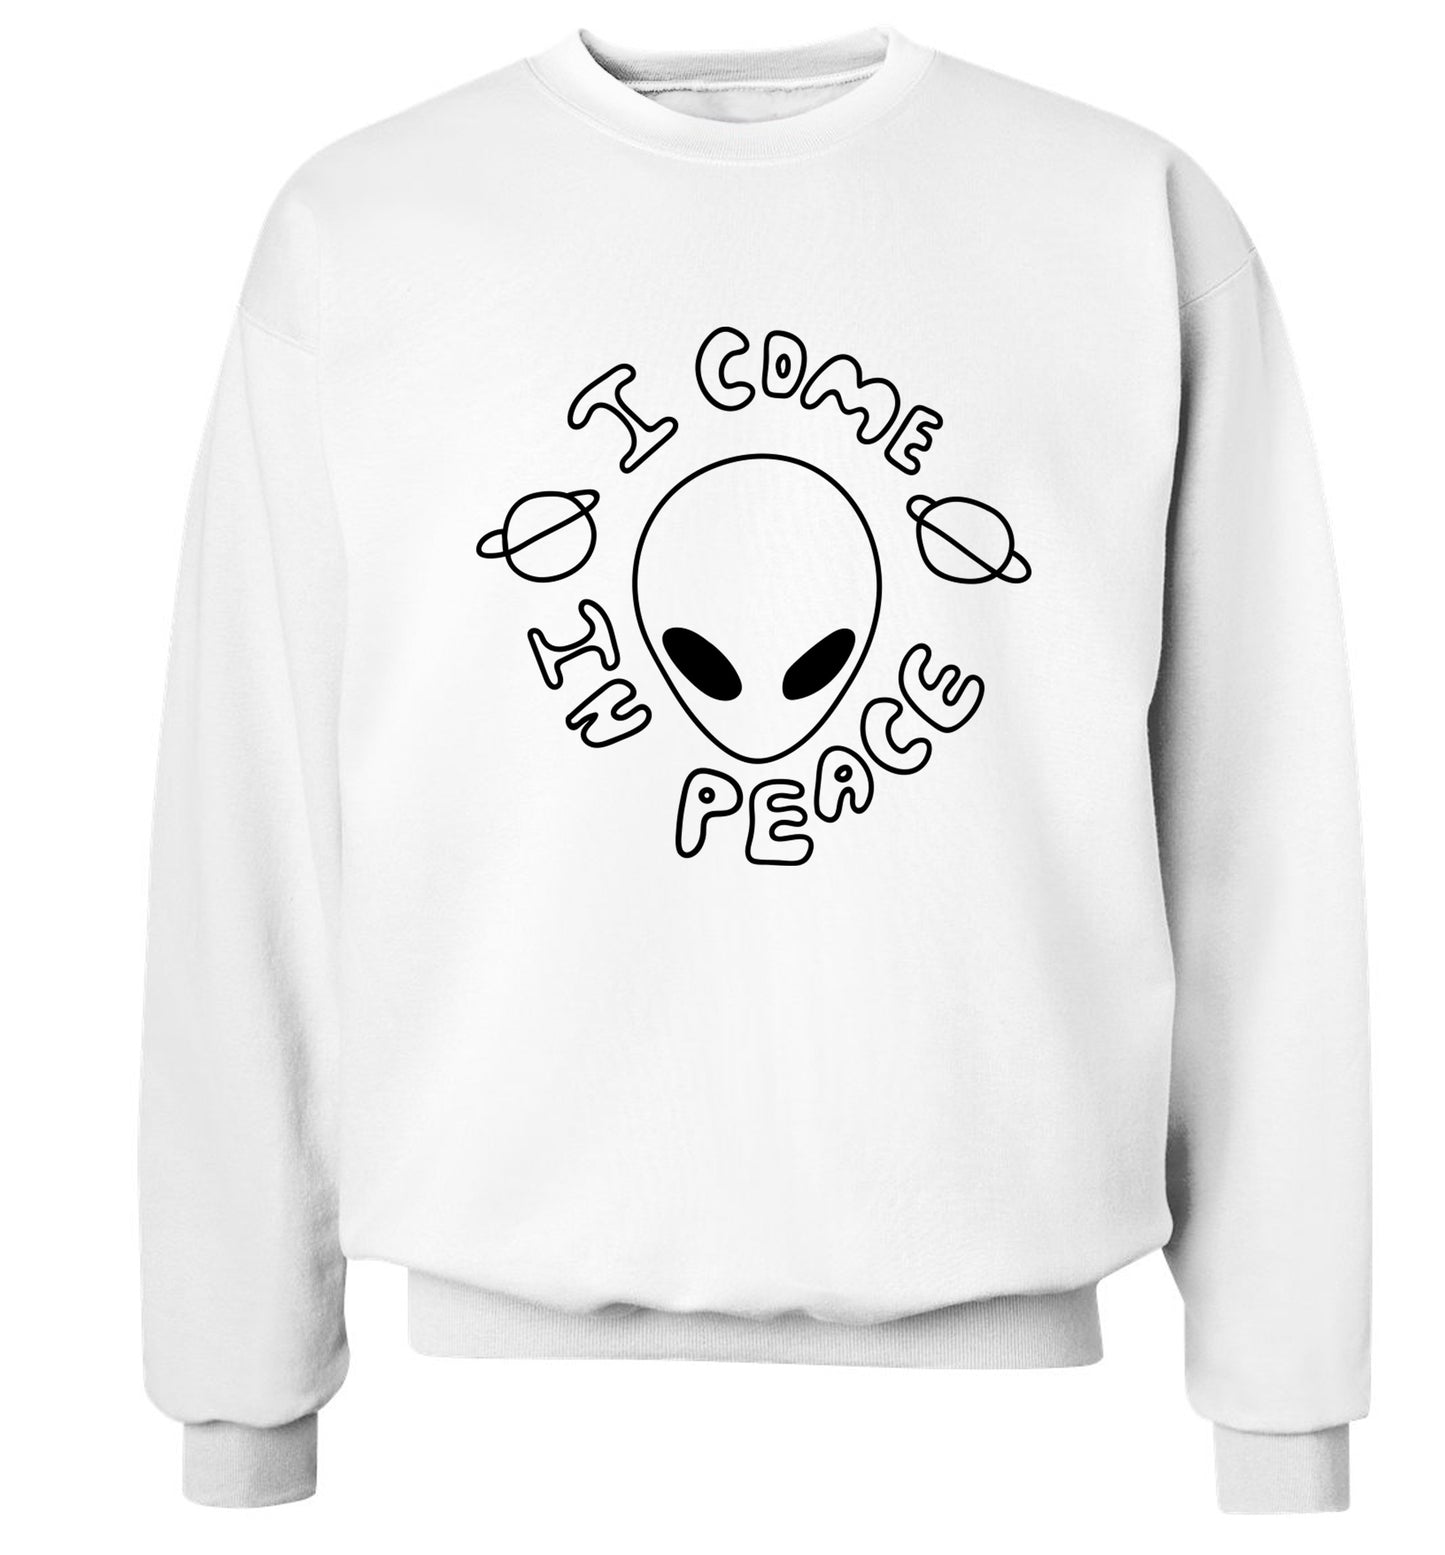 I come in peace Adult's unisex white Sweater 2XL